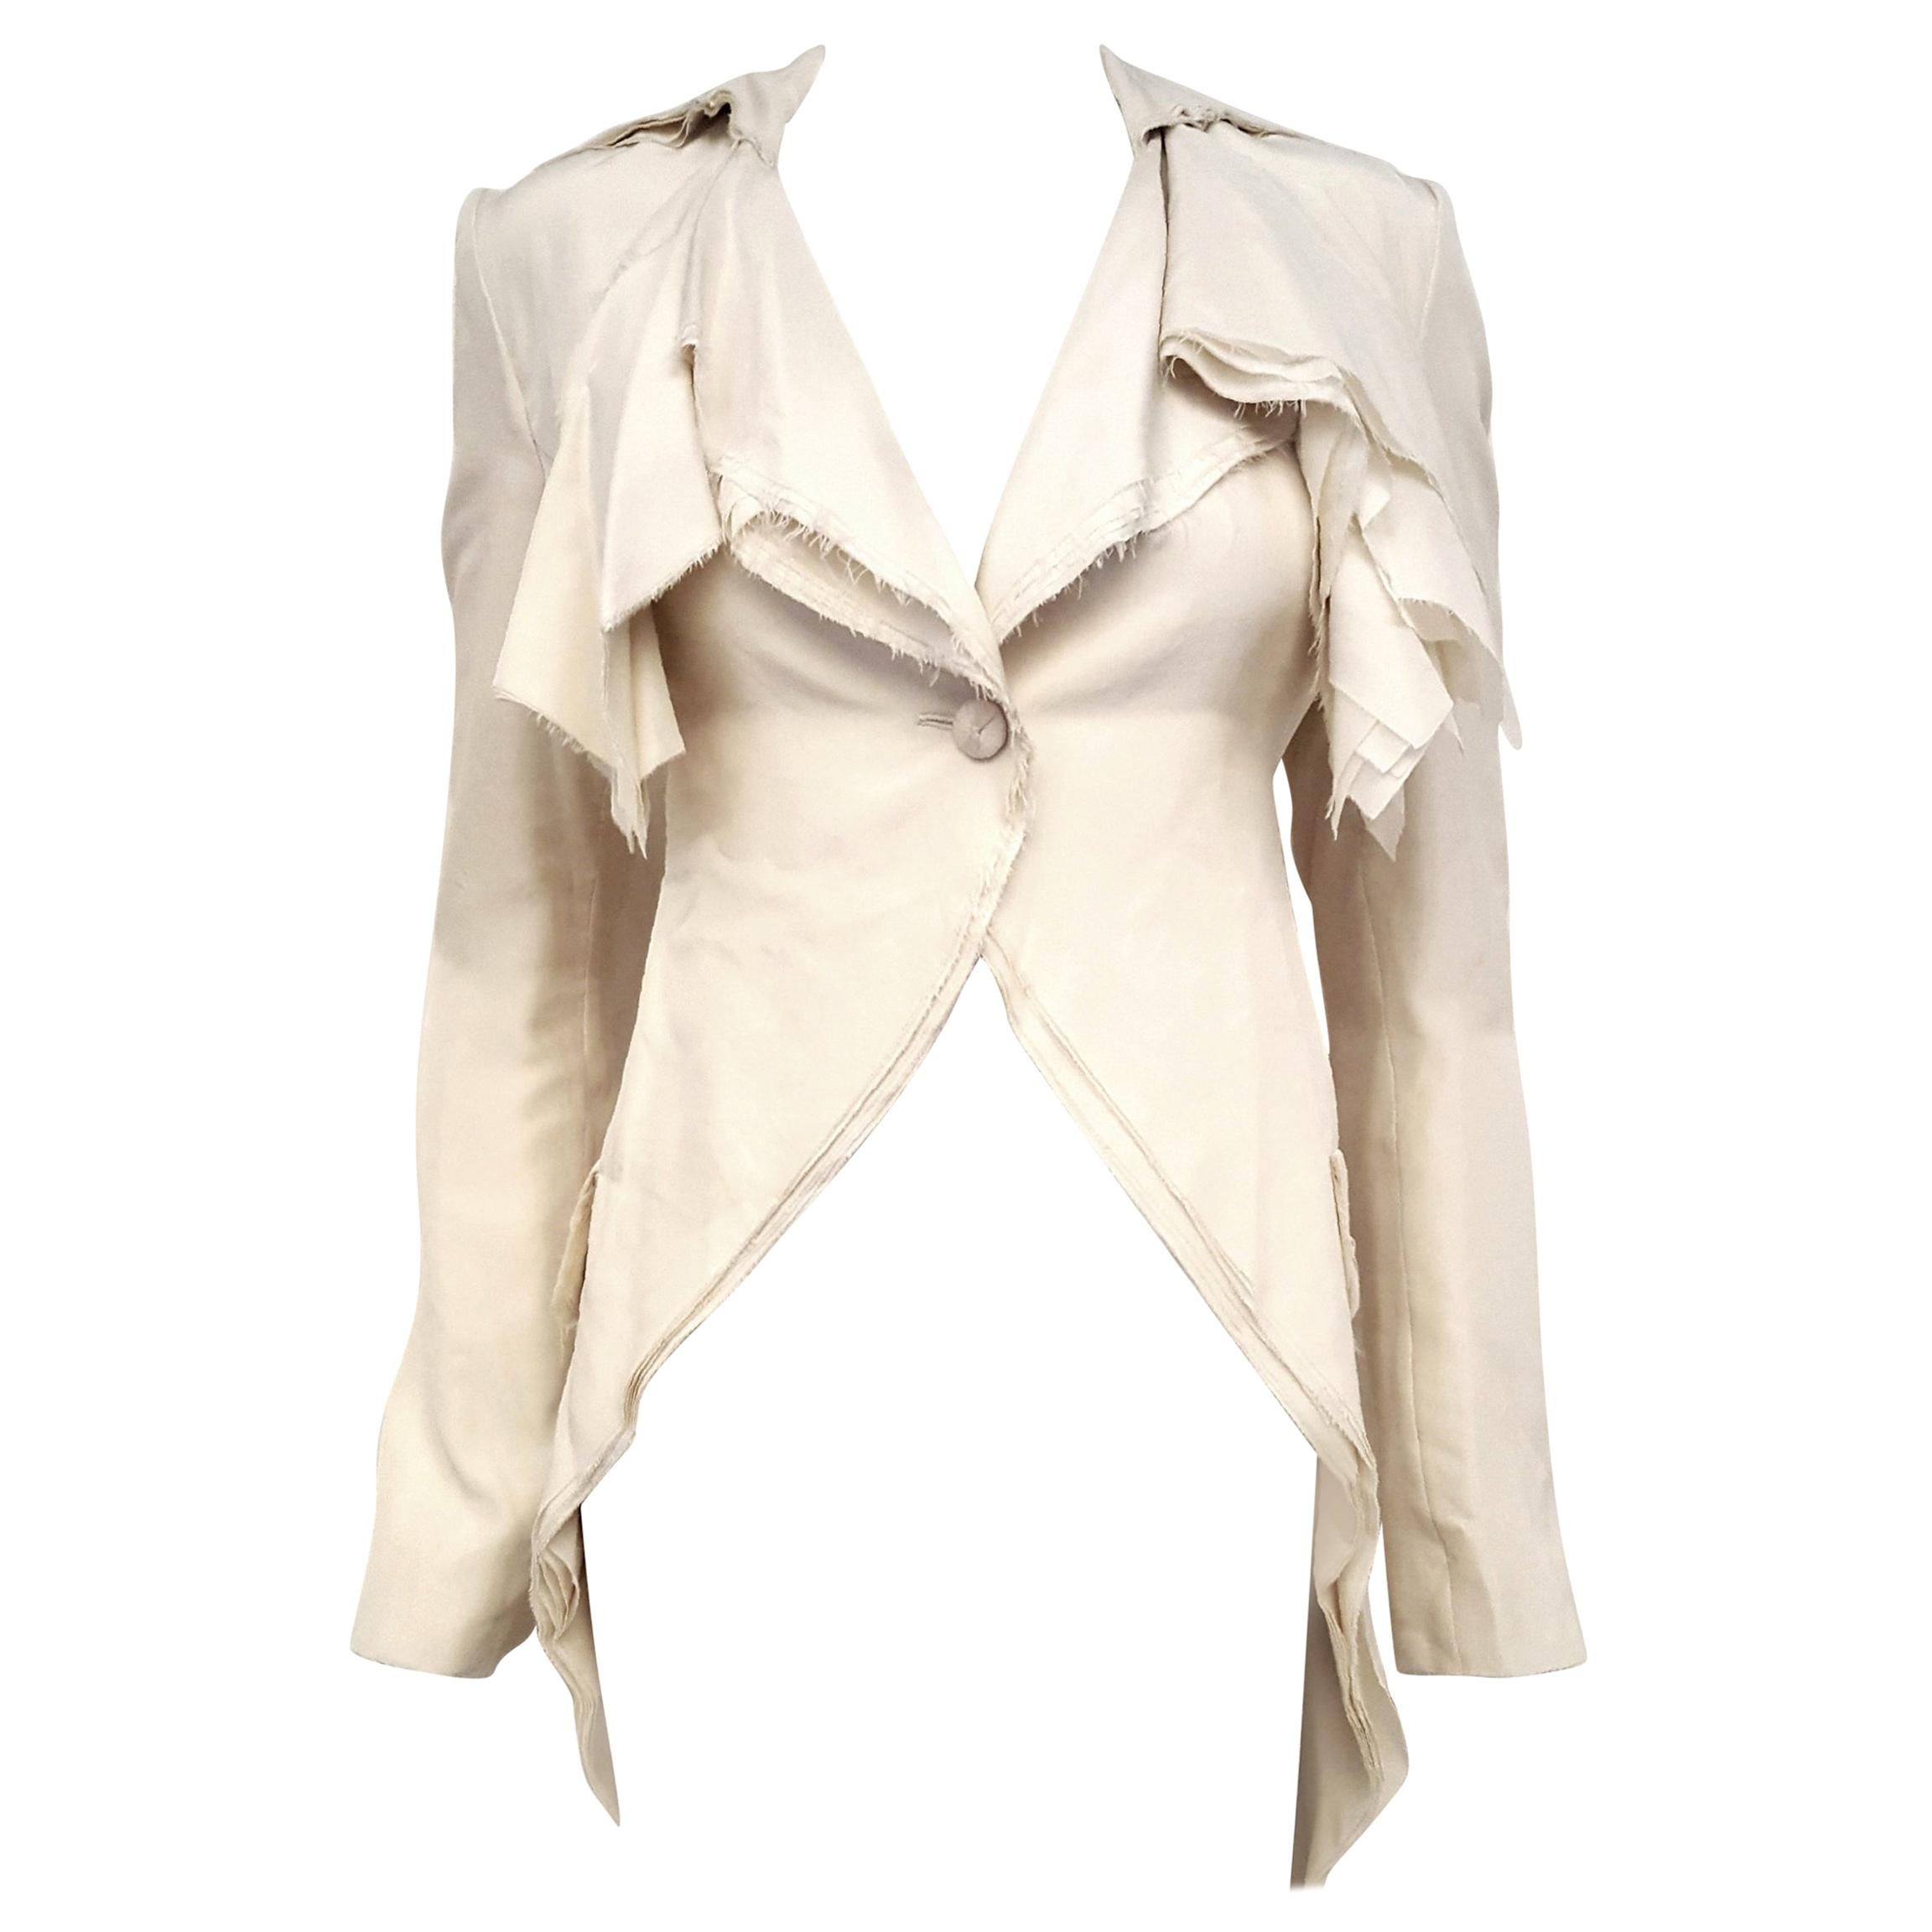 Alexander McQueen Habotai silk winter white coat is a stunning display of signature craftsmanship.  It is composed from ten layers of silk-habotai with frayed edges!  Yes, we said 10 layers of soft, self indulgent silk, making it a striking coverup